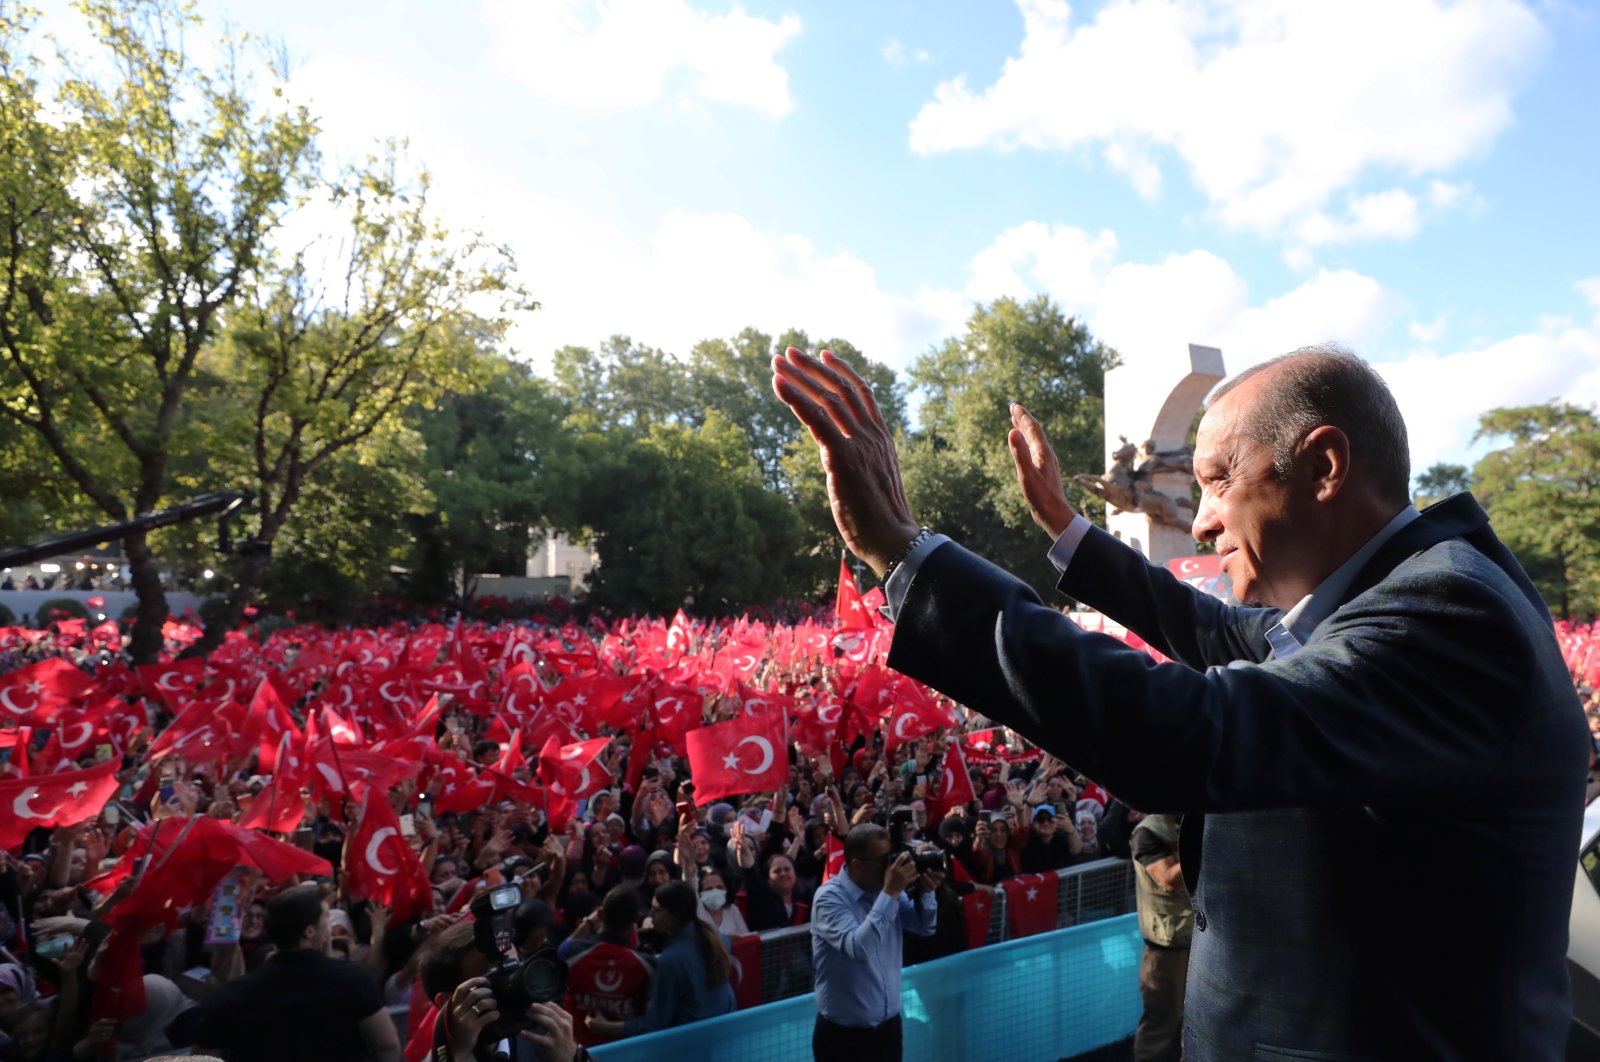 President Recep Tayyip Erdoğan greets the crowd gathered in Saraçhane Square to mark Democracy and National Unity Day in Istanbul, Turkey, July 15, 2022. (EPA)